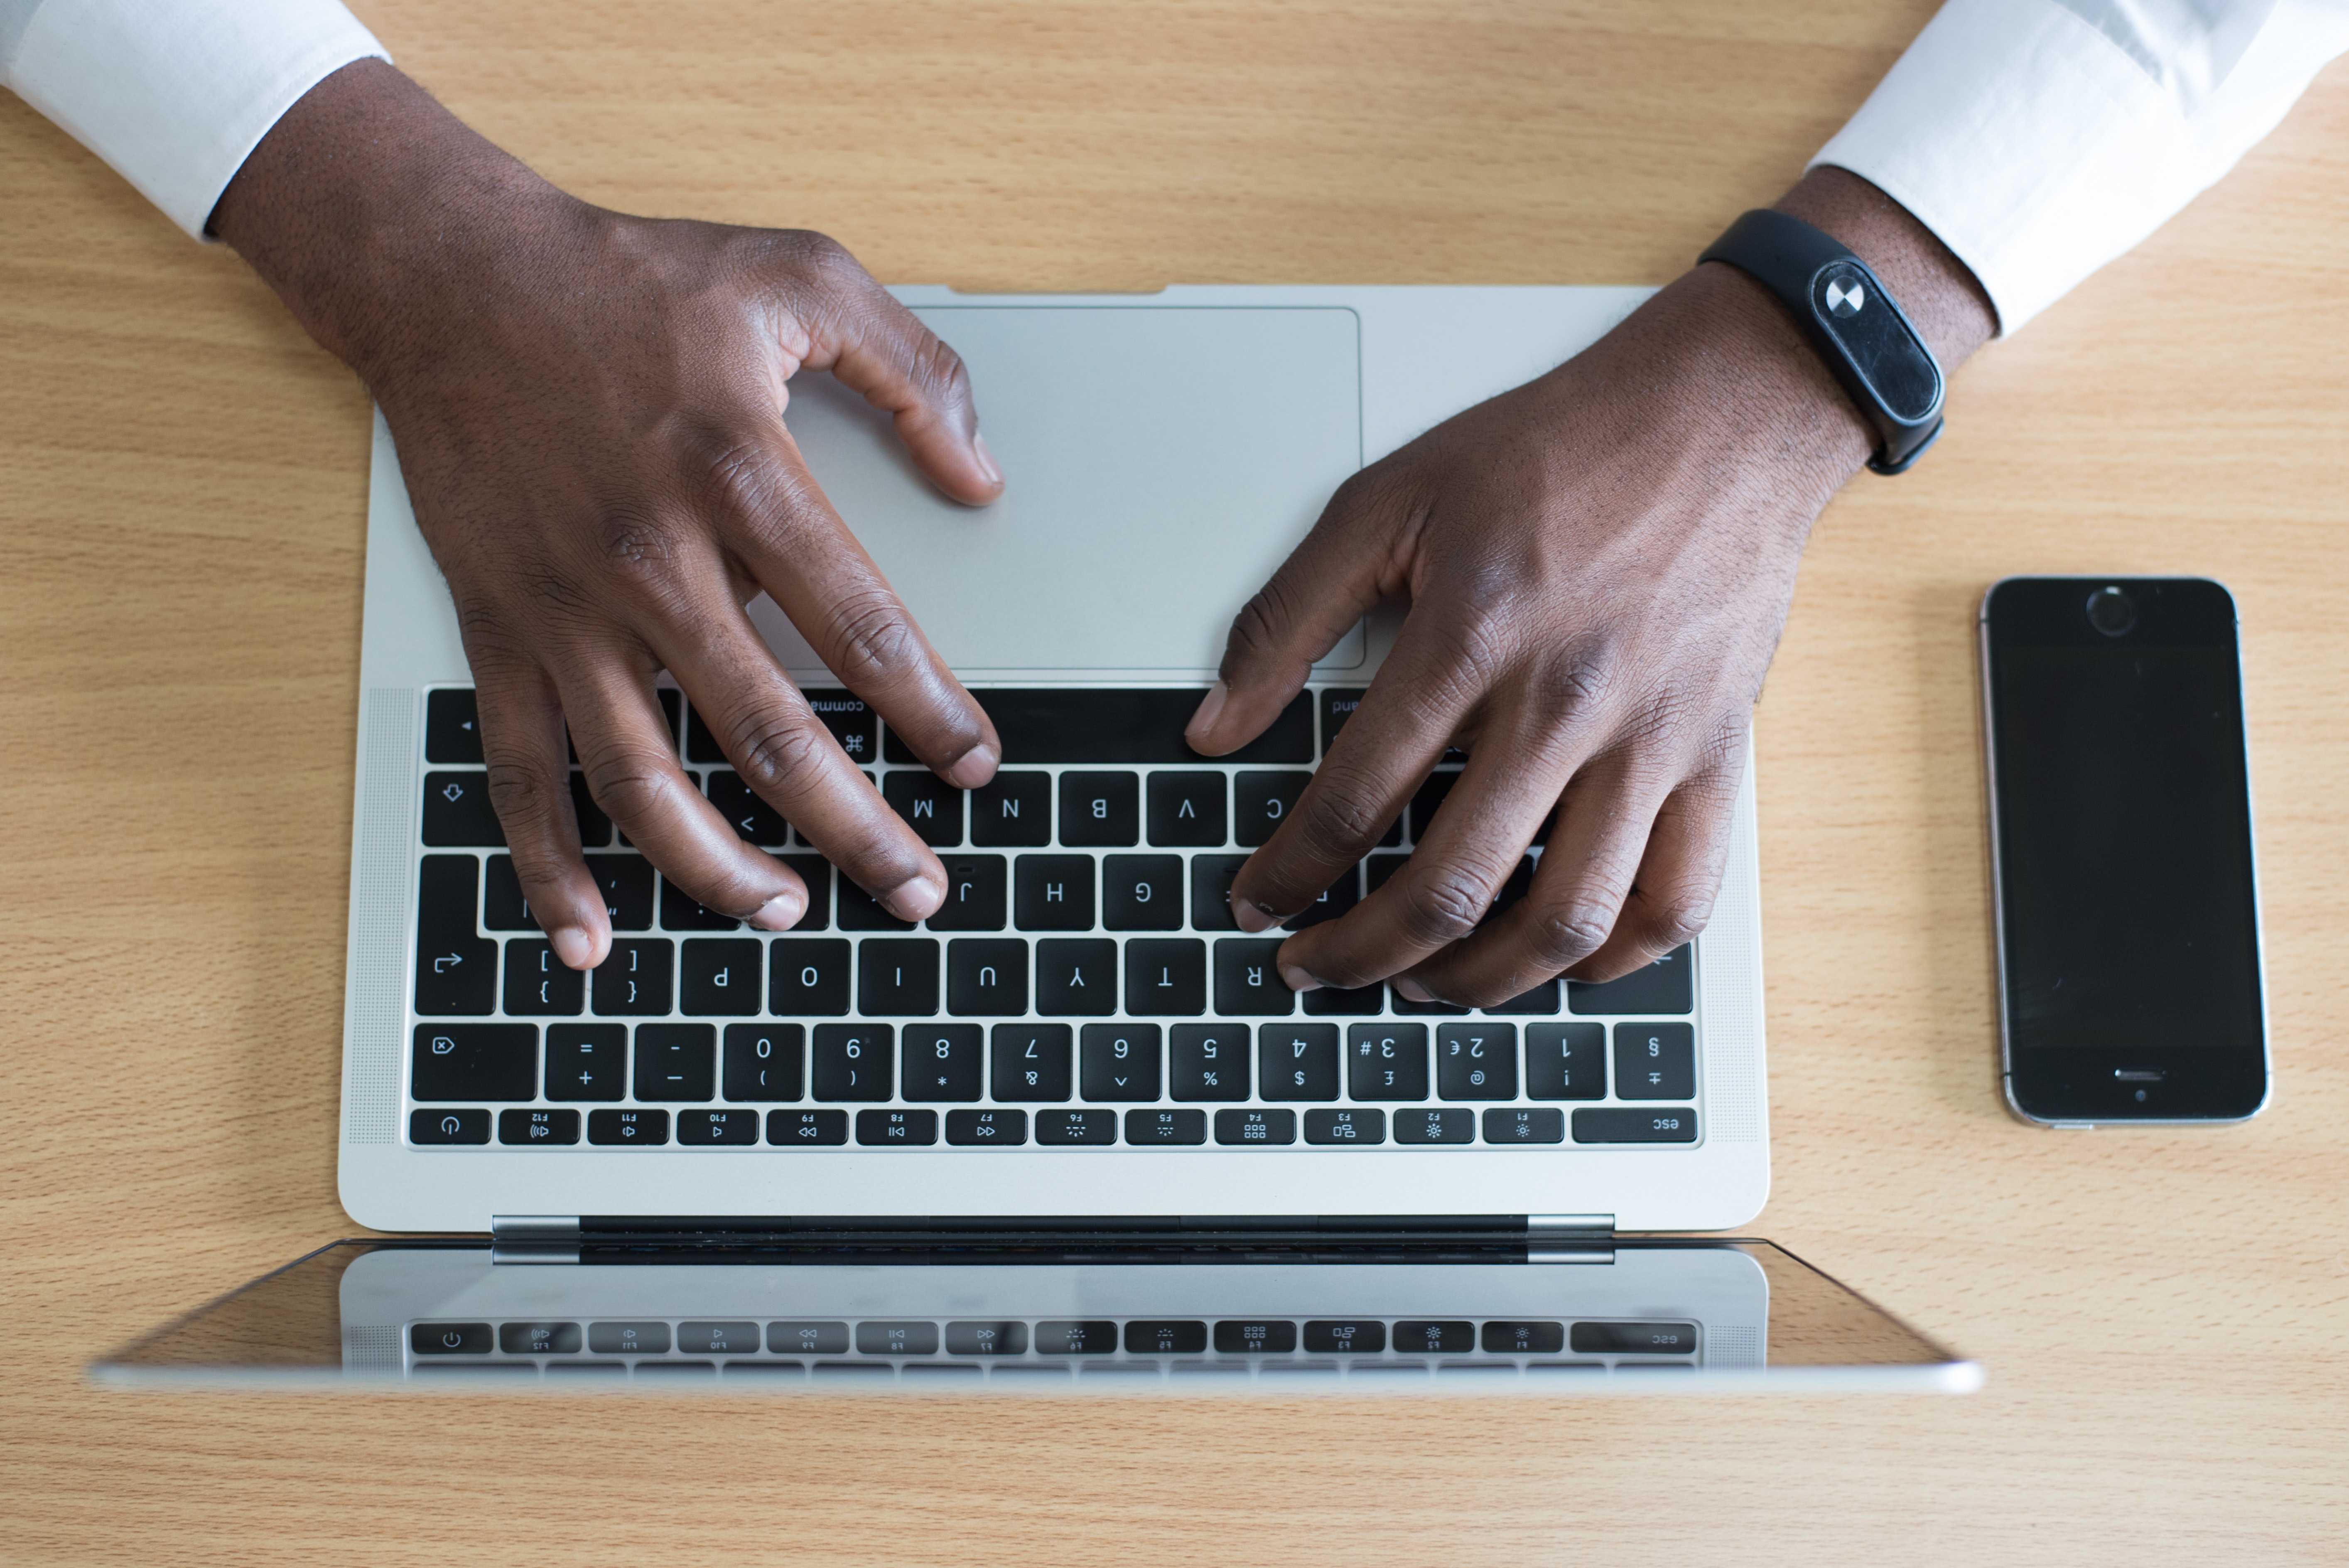 Black person's hands using a laptop